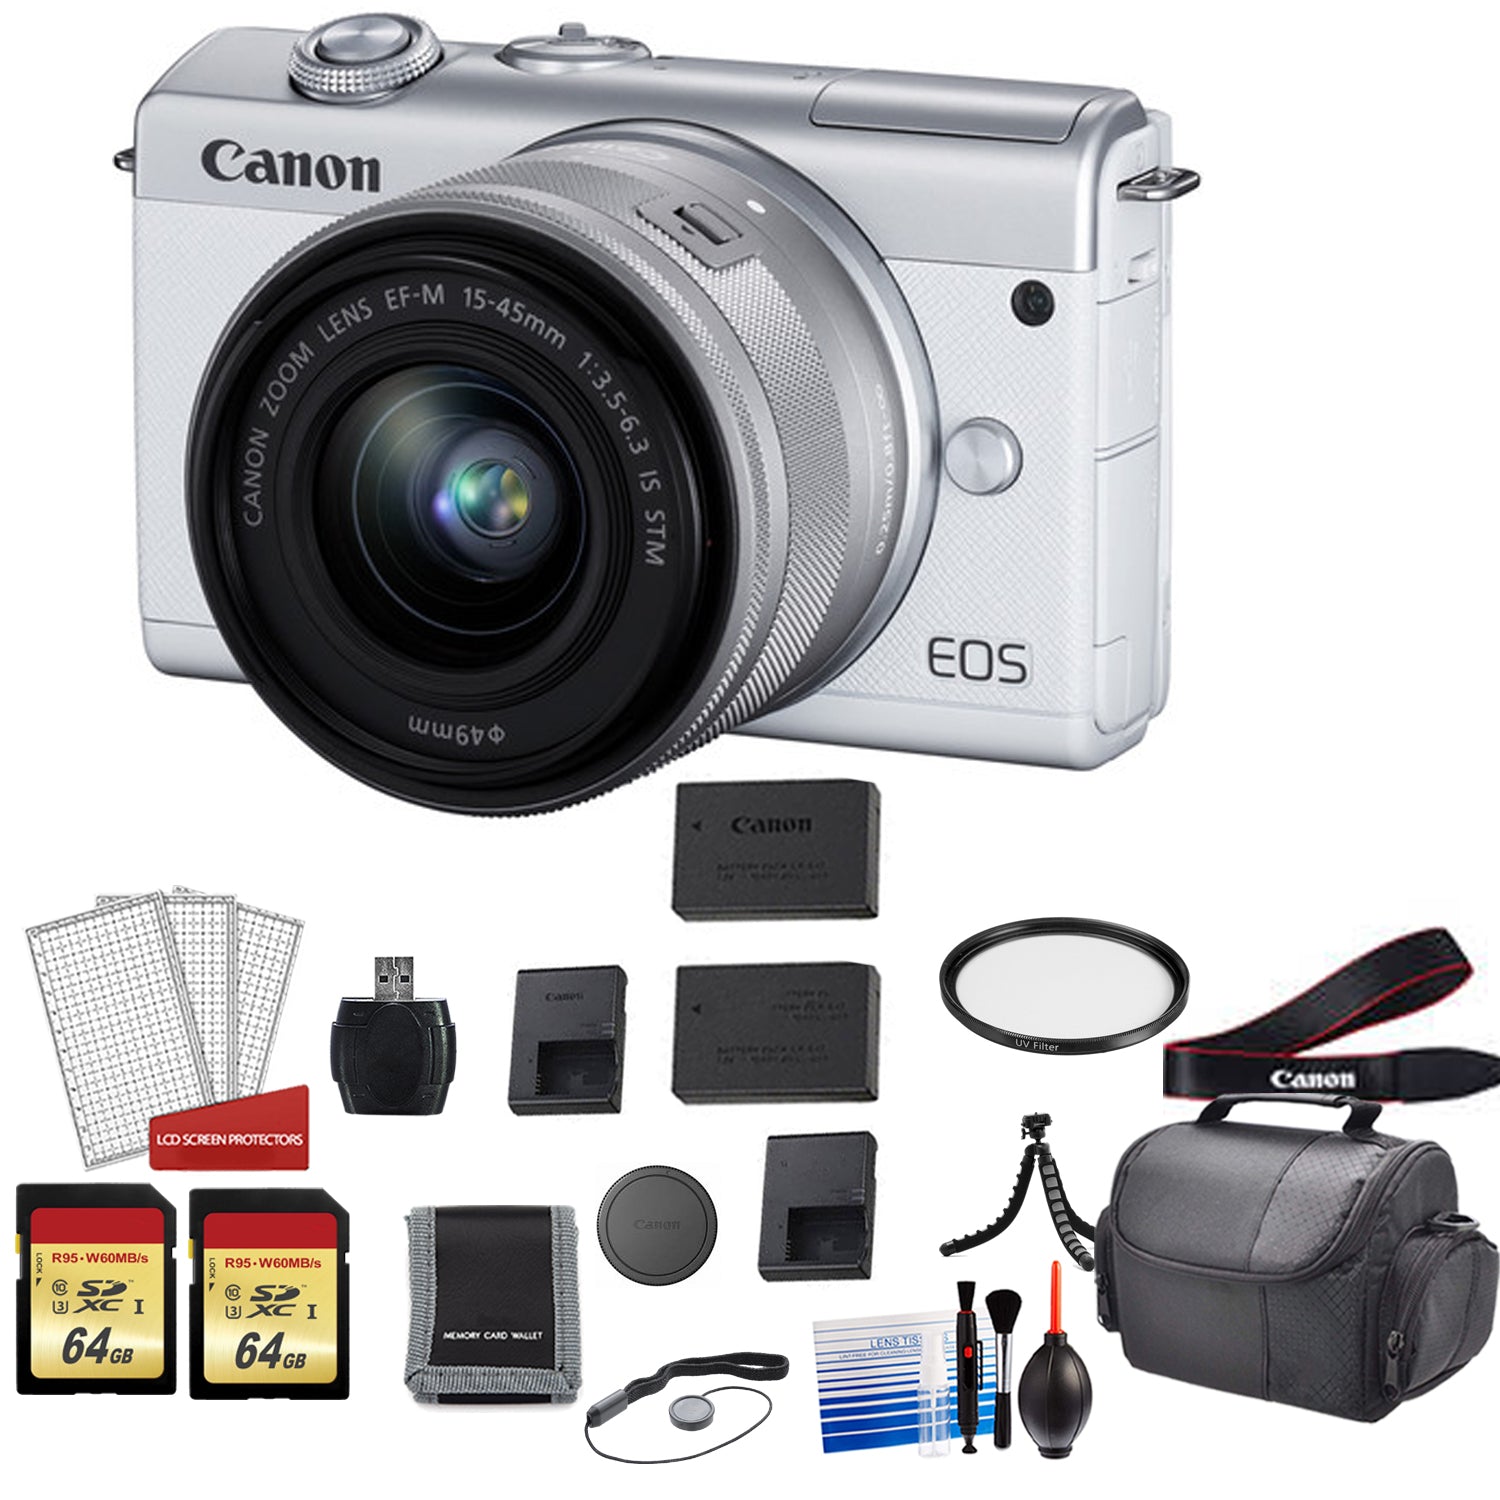 Canon EOS M200 Mirrorless Digital Camera with 15-45mm Lens (White) Kit with Spare Battery + 128GB Memory Card Bundle